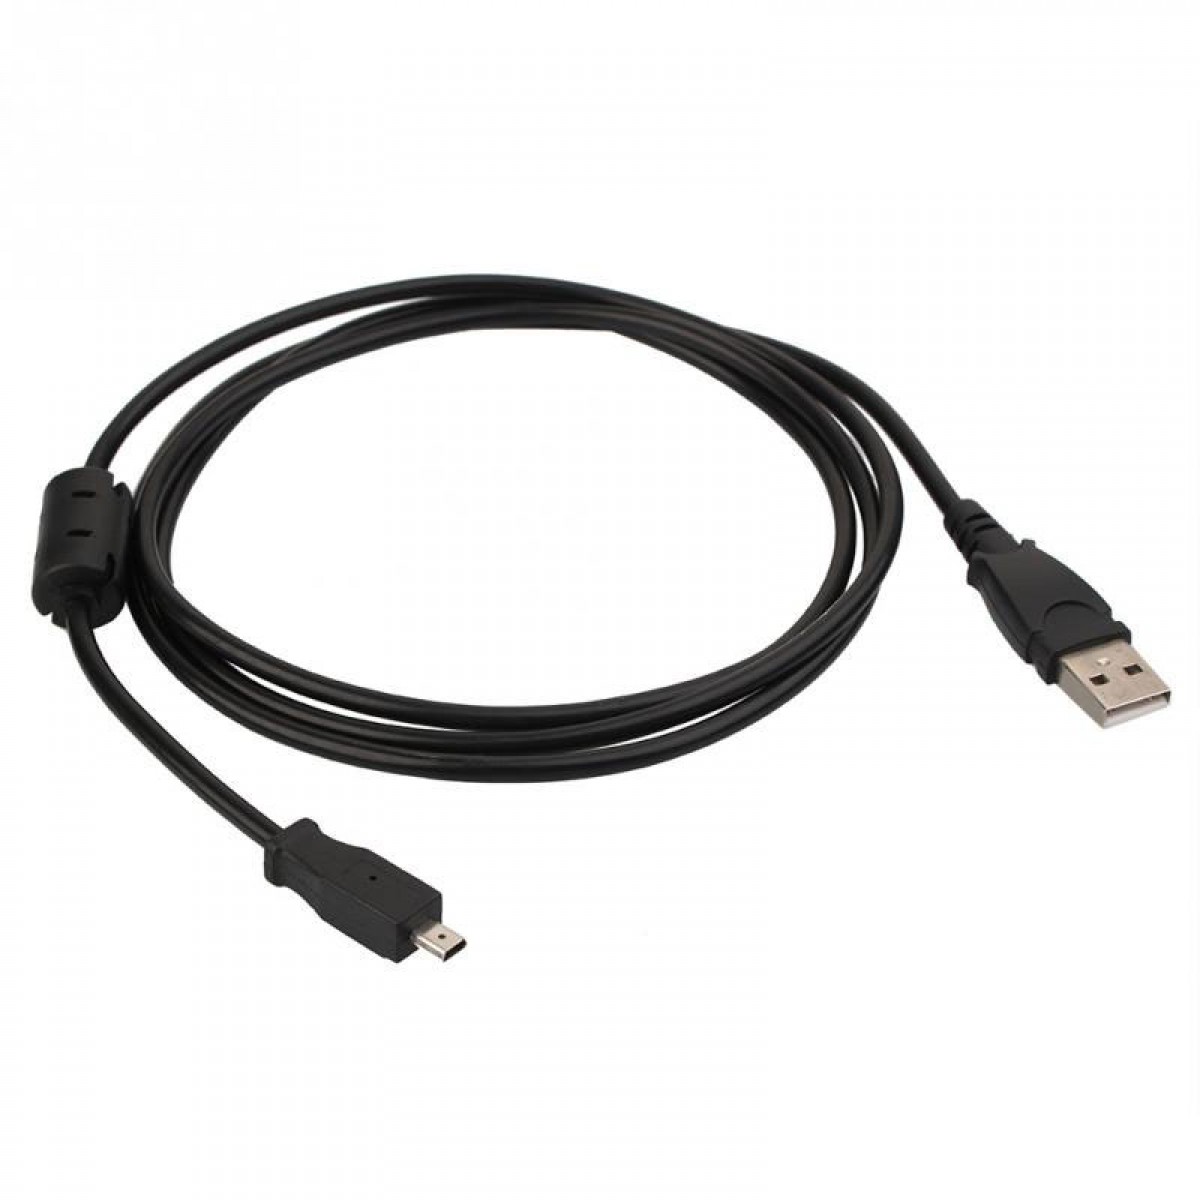 LETO USB PC Data Sync Cable Cord Lead For Kodak EasyShare camera Z712 IS Z 712 IS 